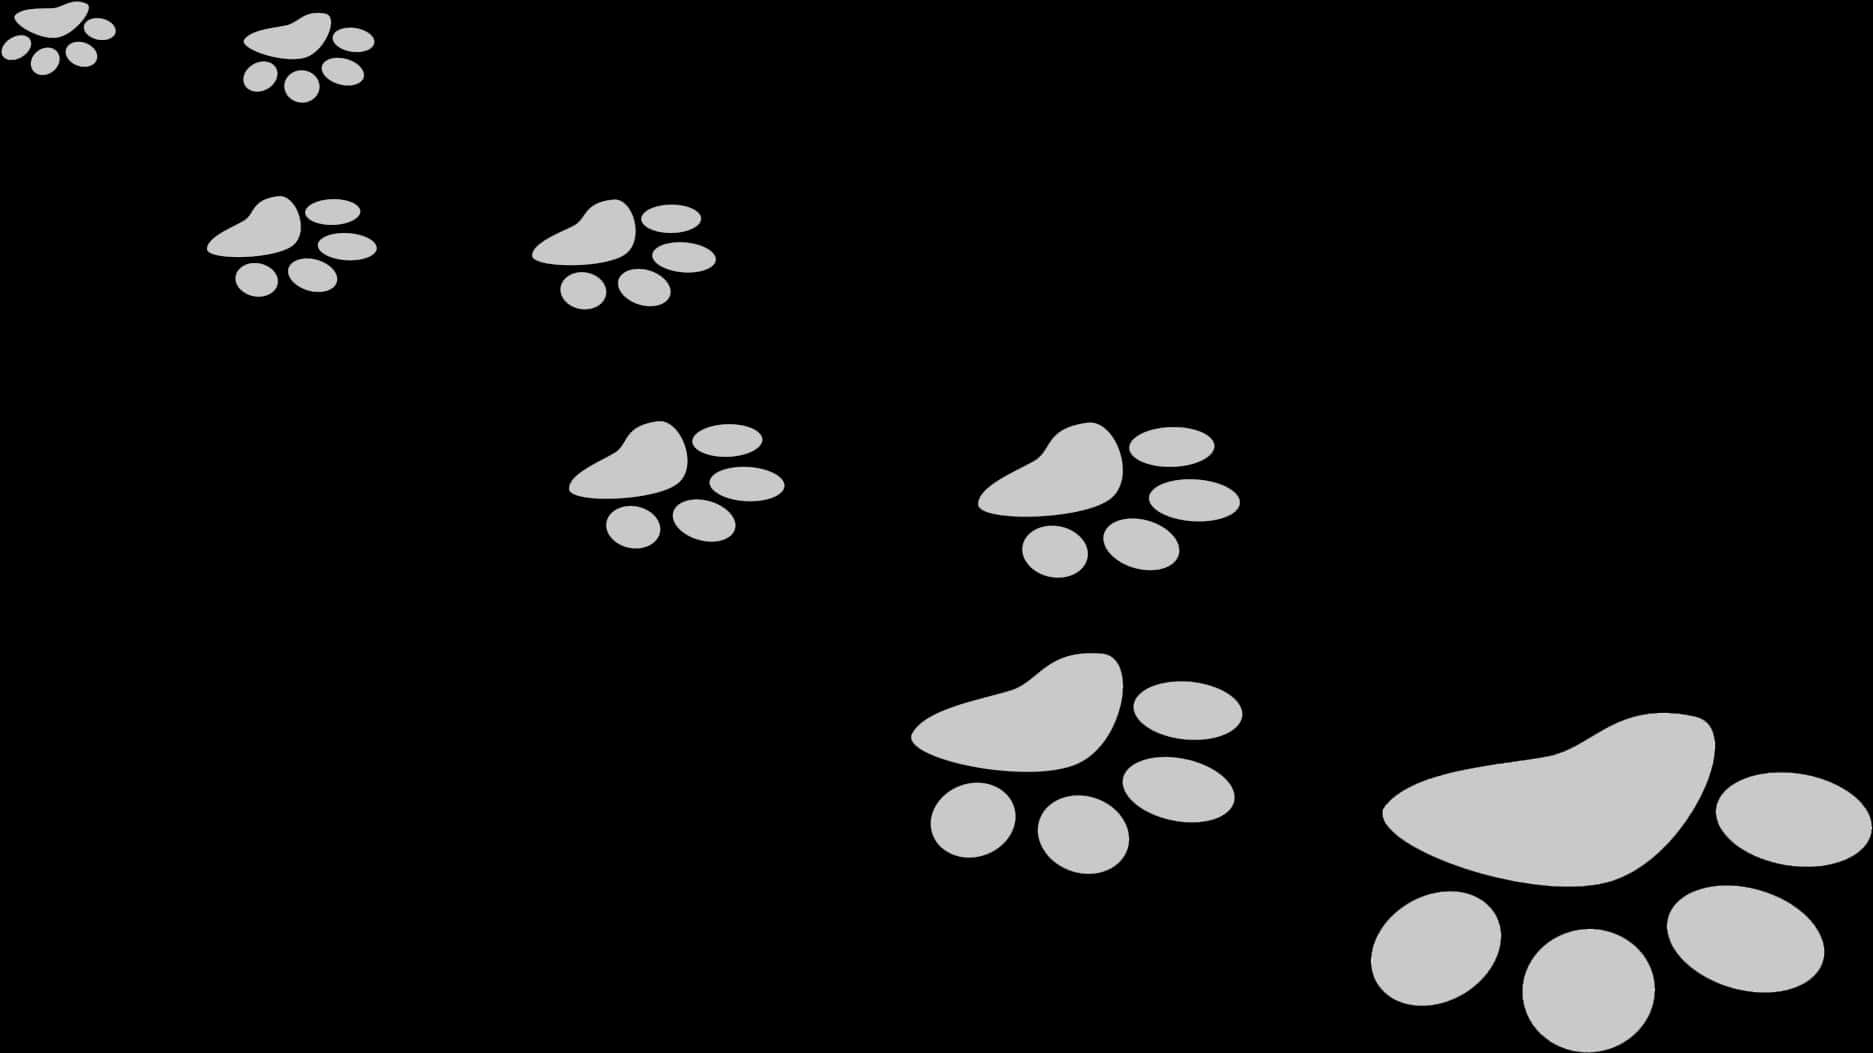 A Group Of Paw Prints On A Black Background